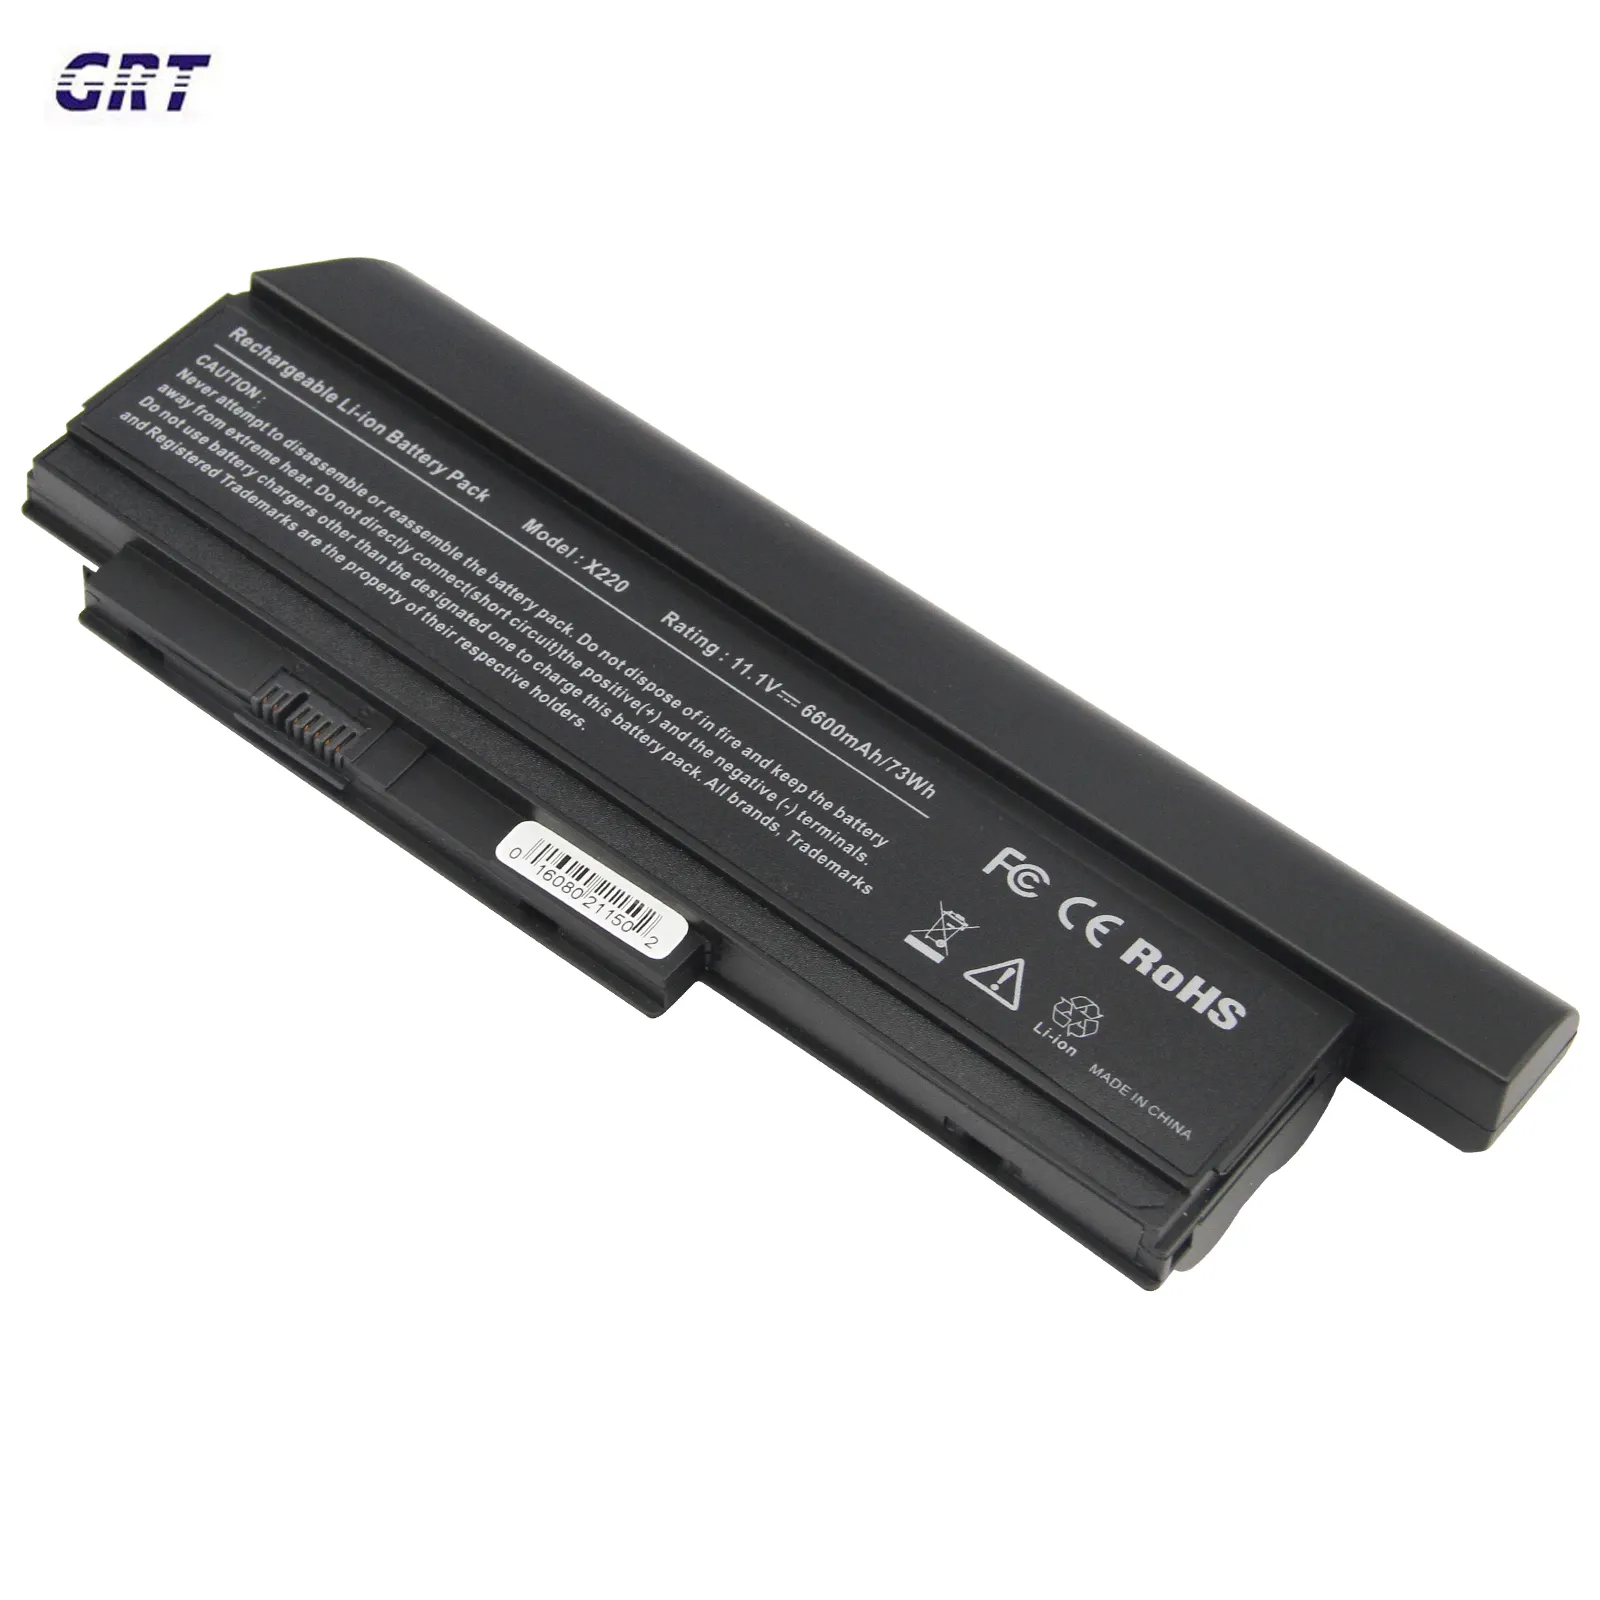 Replacement 11.1V 6600mAh Laptop Battery For Lenovo ThinkPad X220 X220i X230i X220s X230 42T4862 Notebook Charger